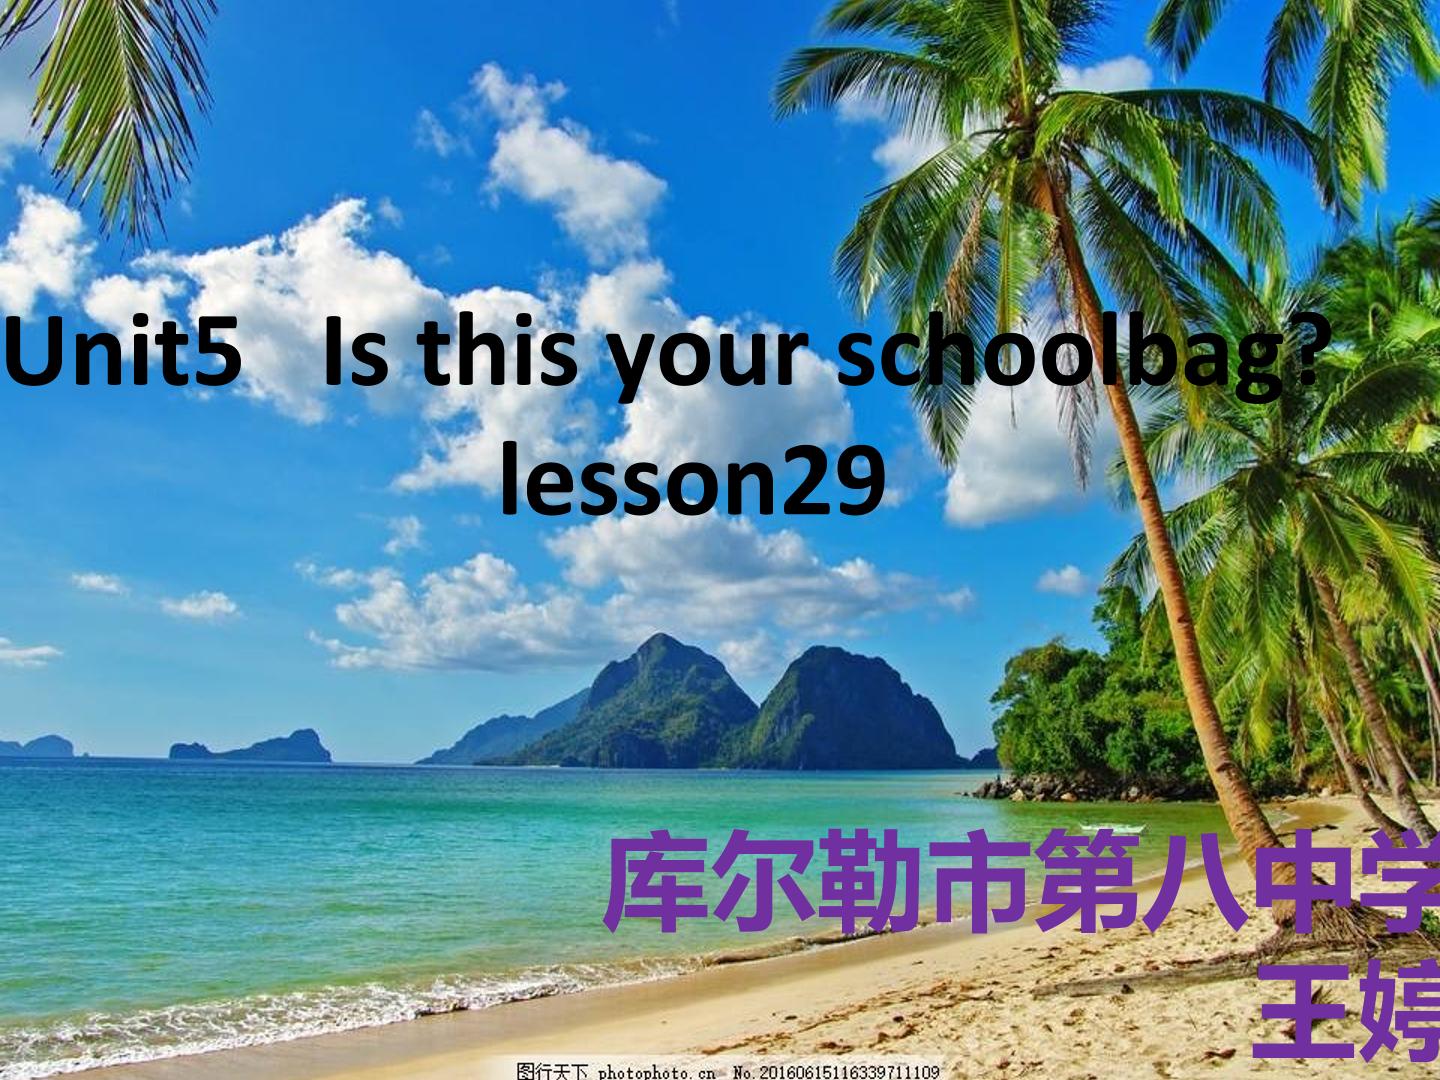 Unit 5 Is this your schoolbag?lesson29